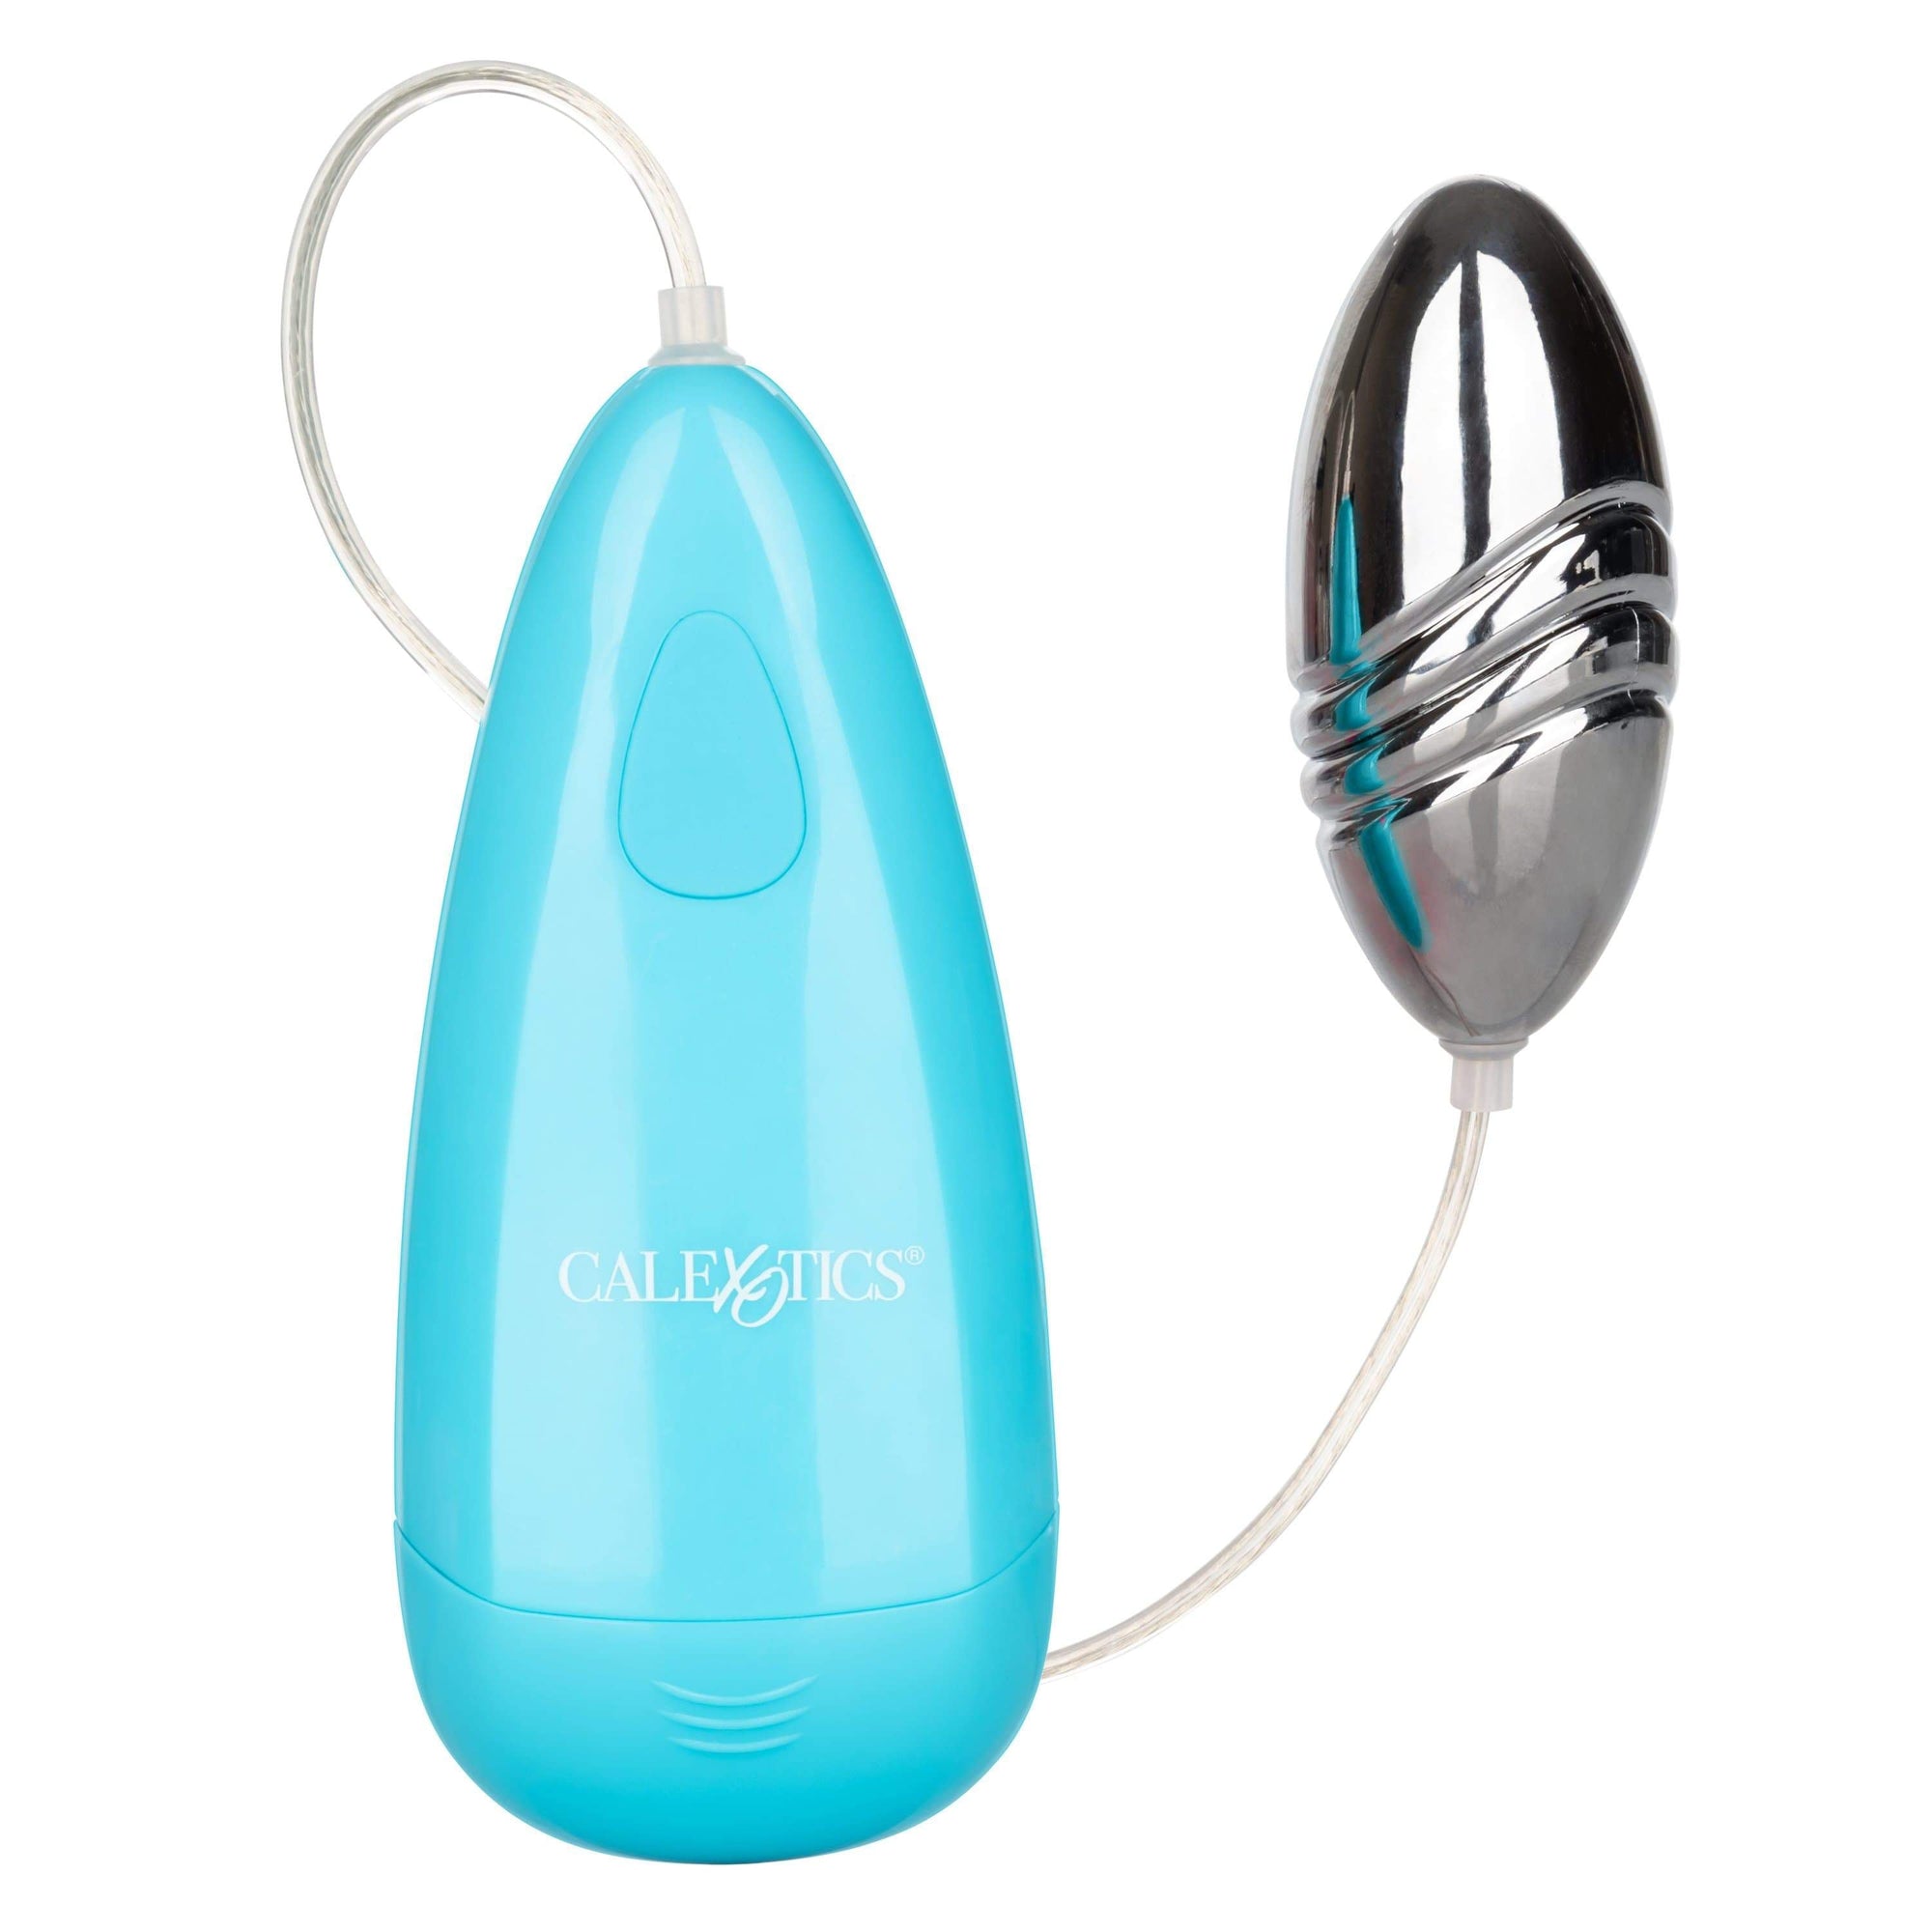 California Exotics - Classic Waterproof Gyrating Bullet Vibrator with Remote (SIlver) -  Wired Remote Control Egg (Vibration) Non Rechargeable  Durio.sg